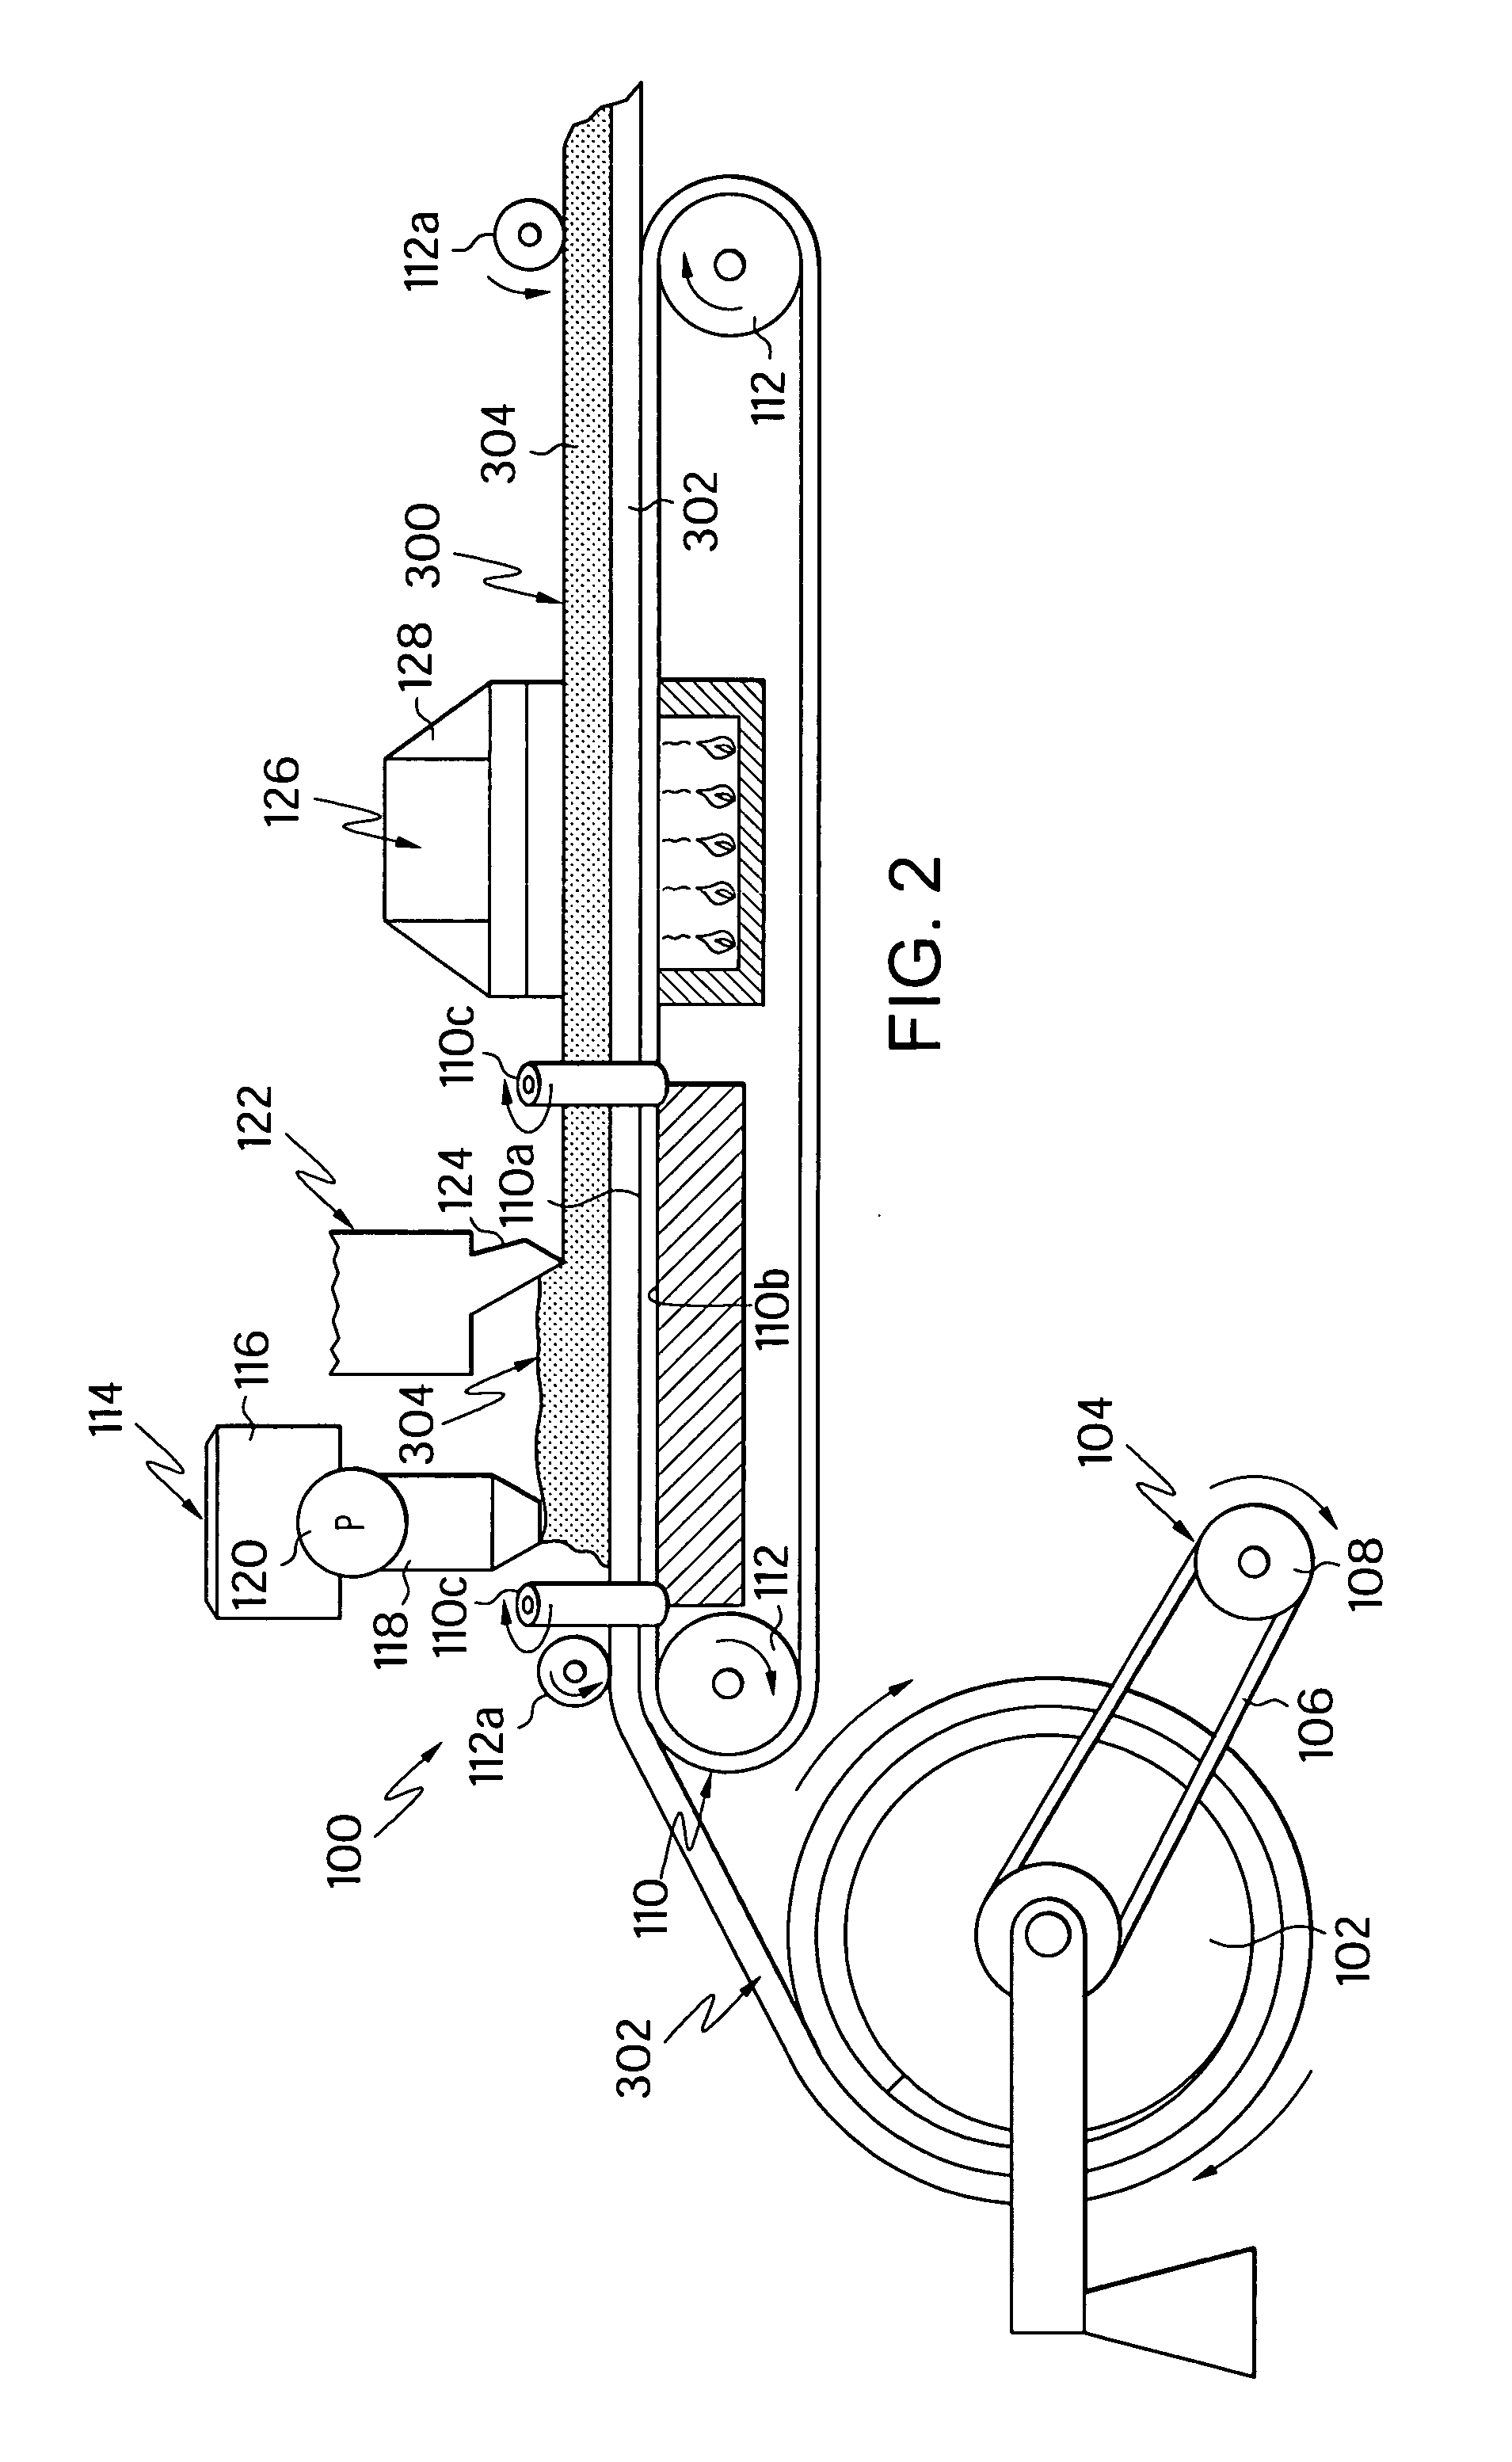 Water-based polishing pads having improved contact area